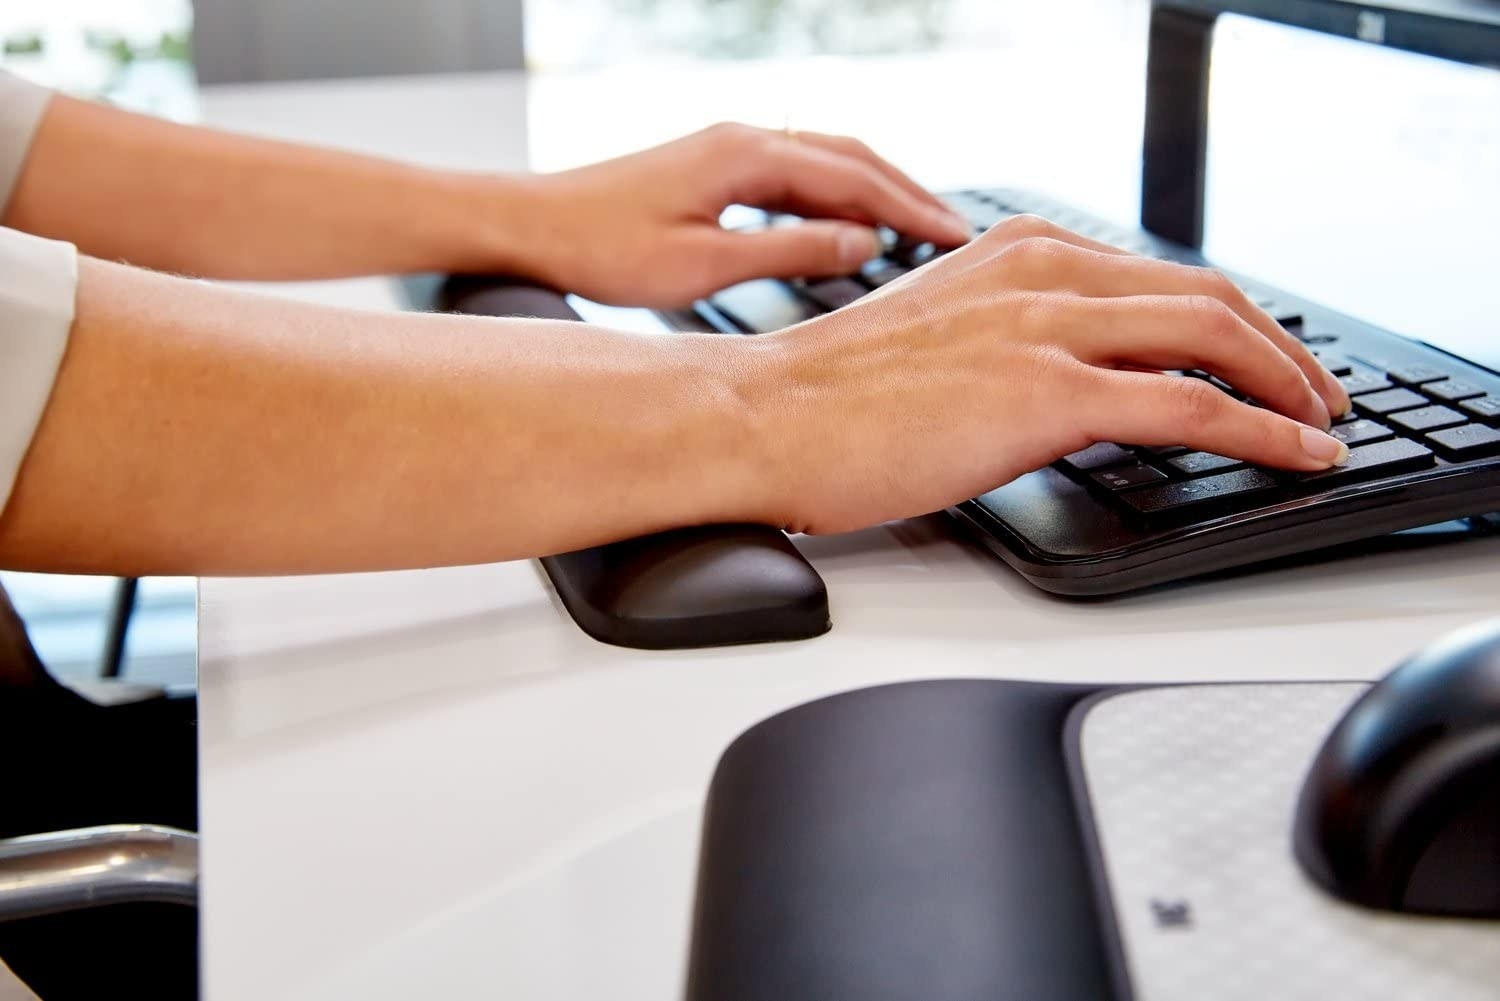 A person typing on their laptop with a long fabric wrist rest underneath their arms